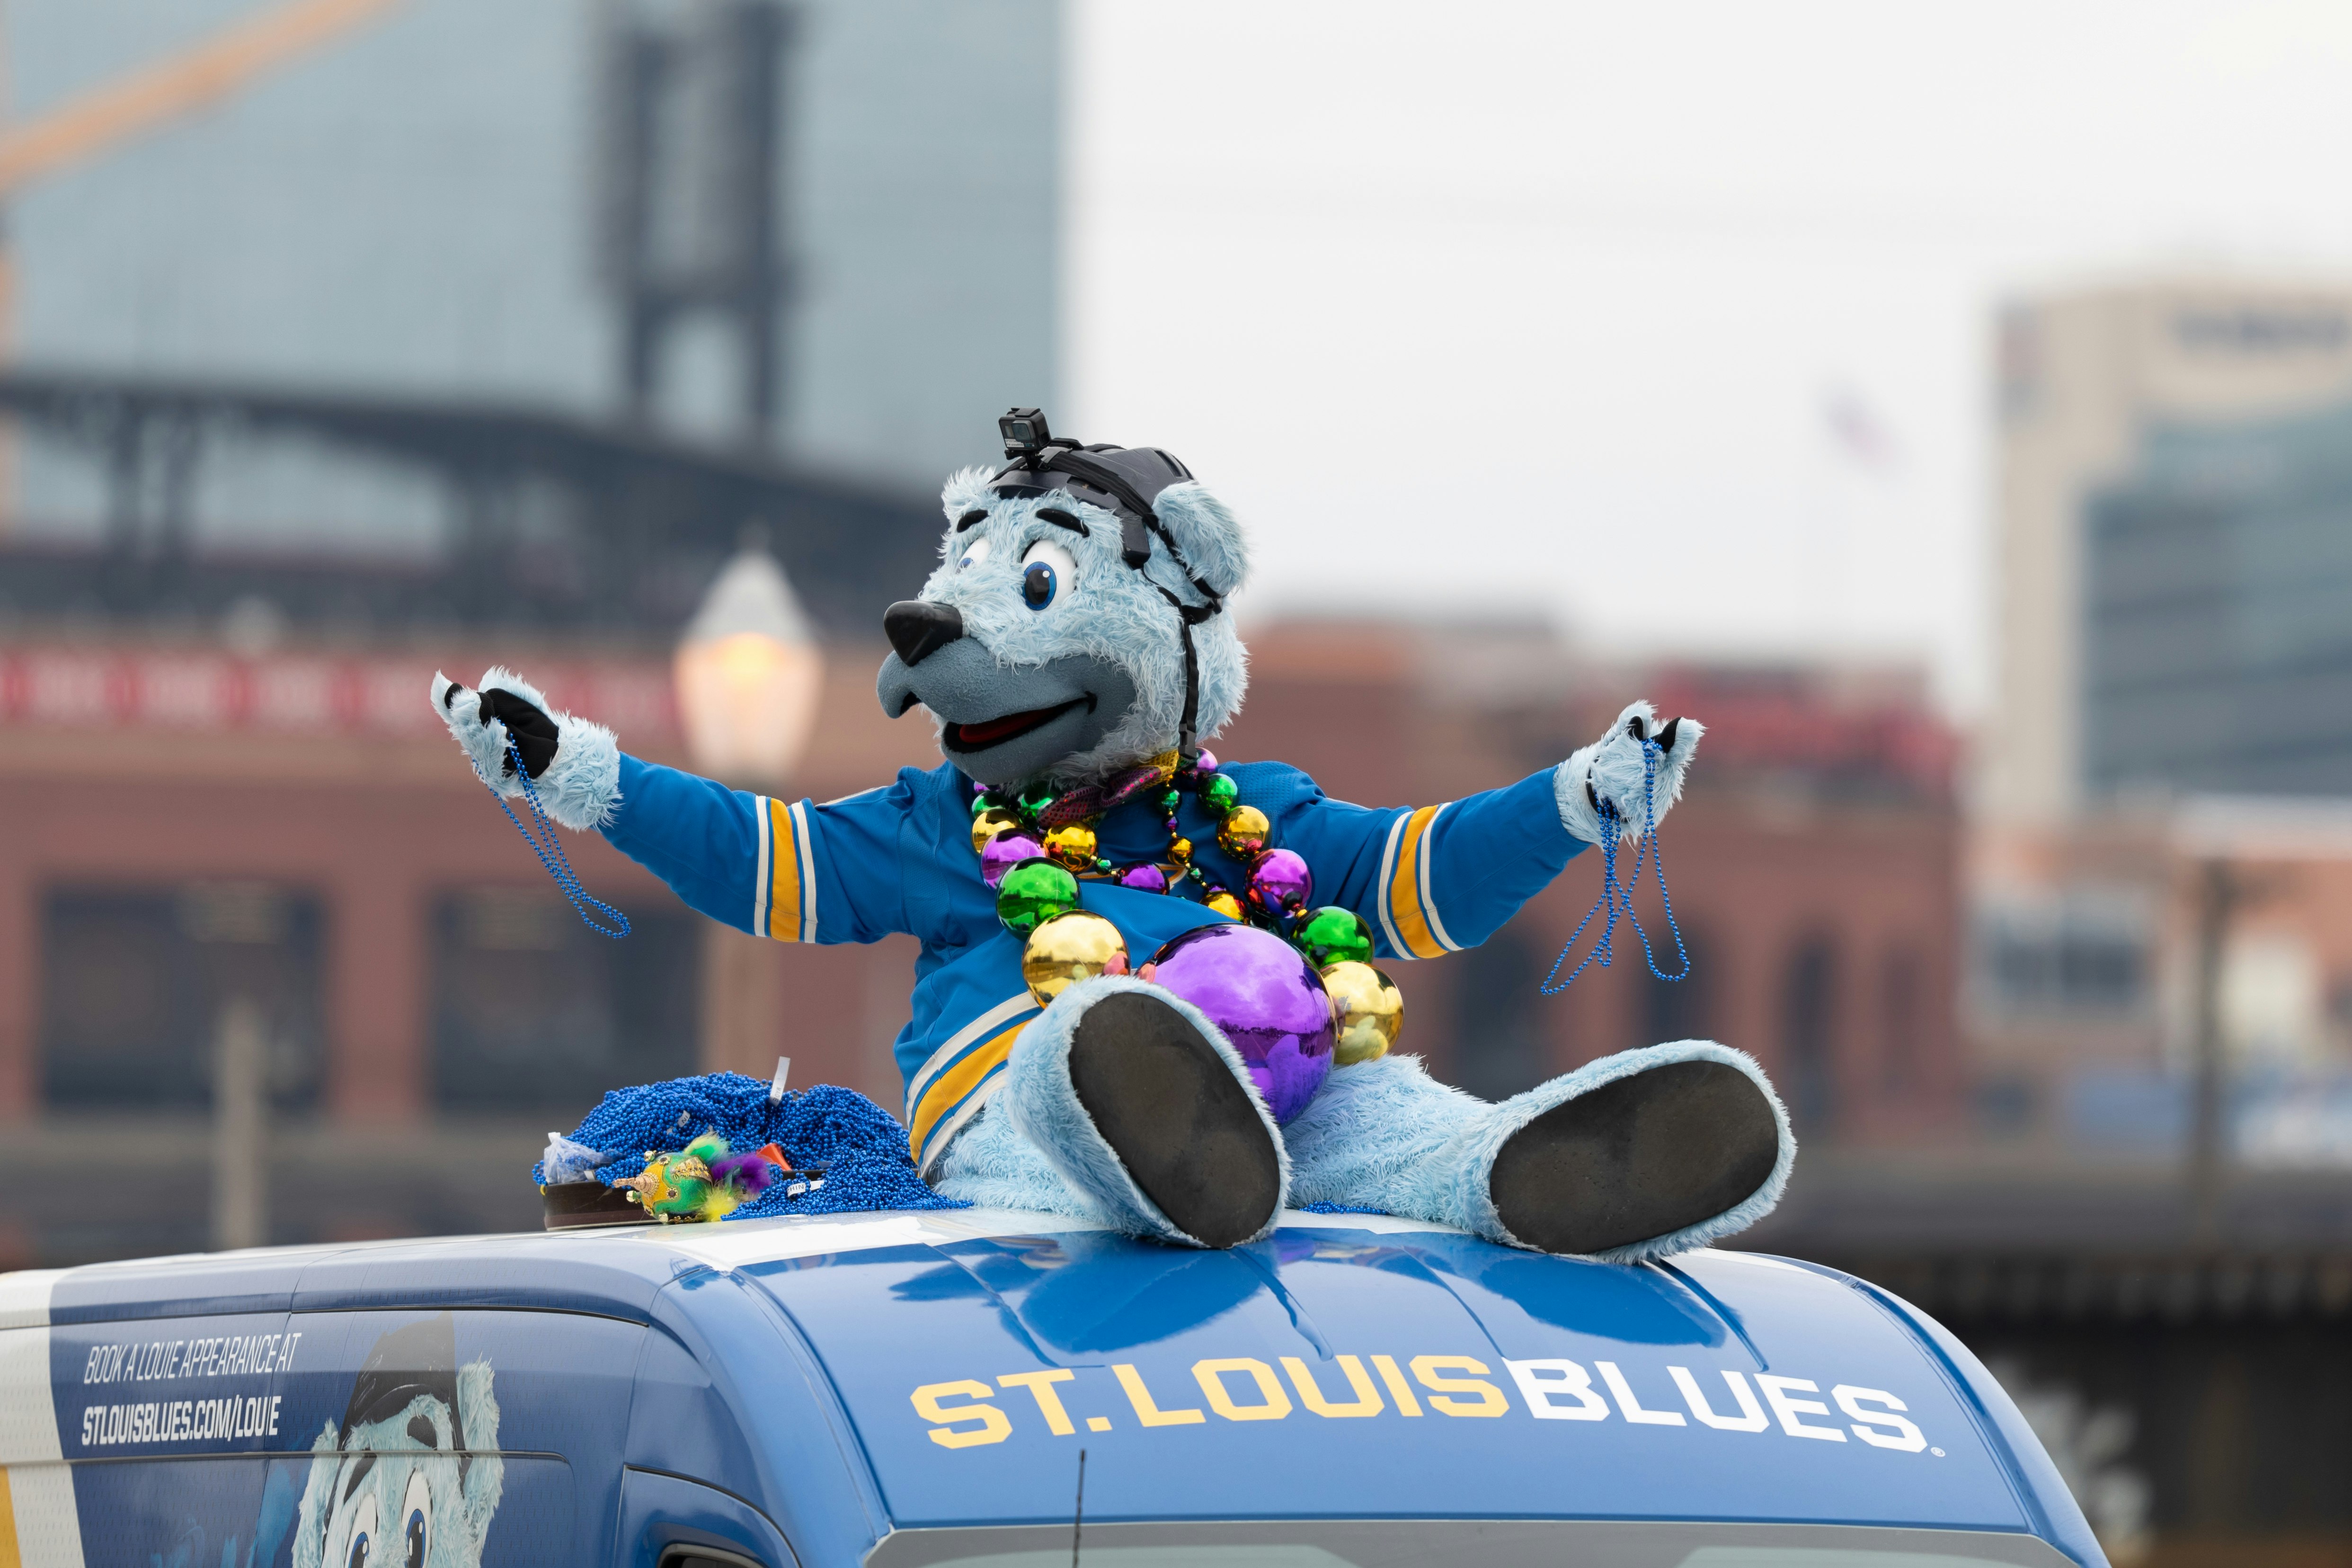 The St Louis Blues mascot riding on top of a vehicle during the Bud Light Grand Parade